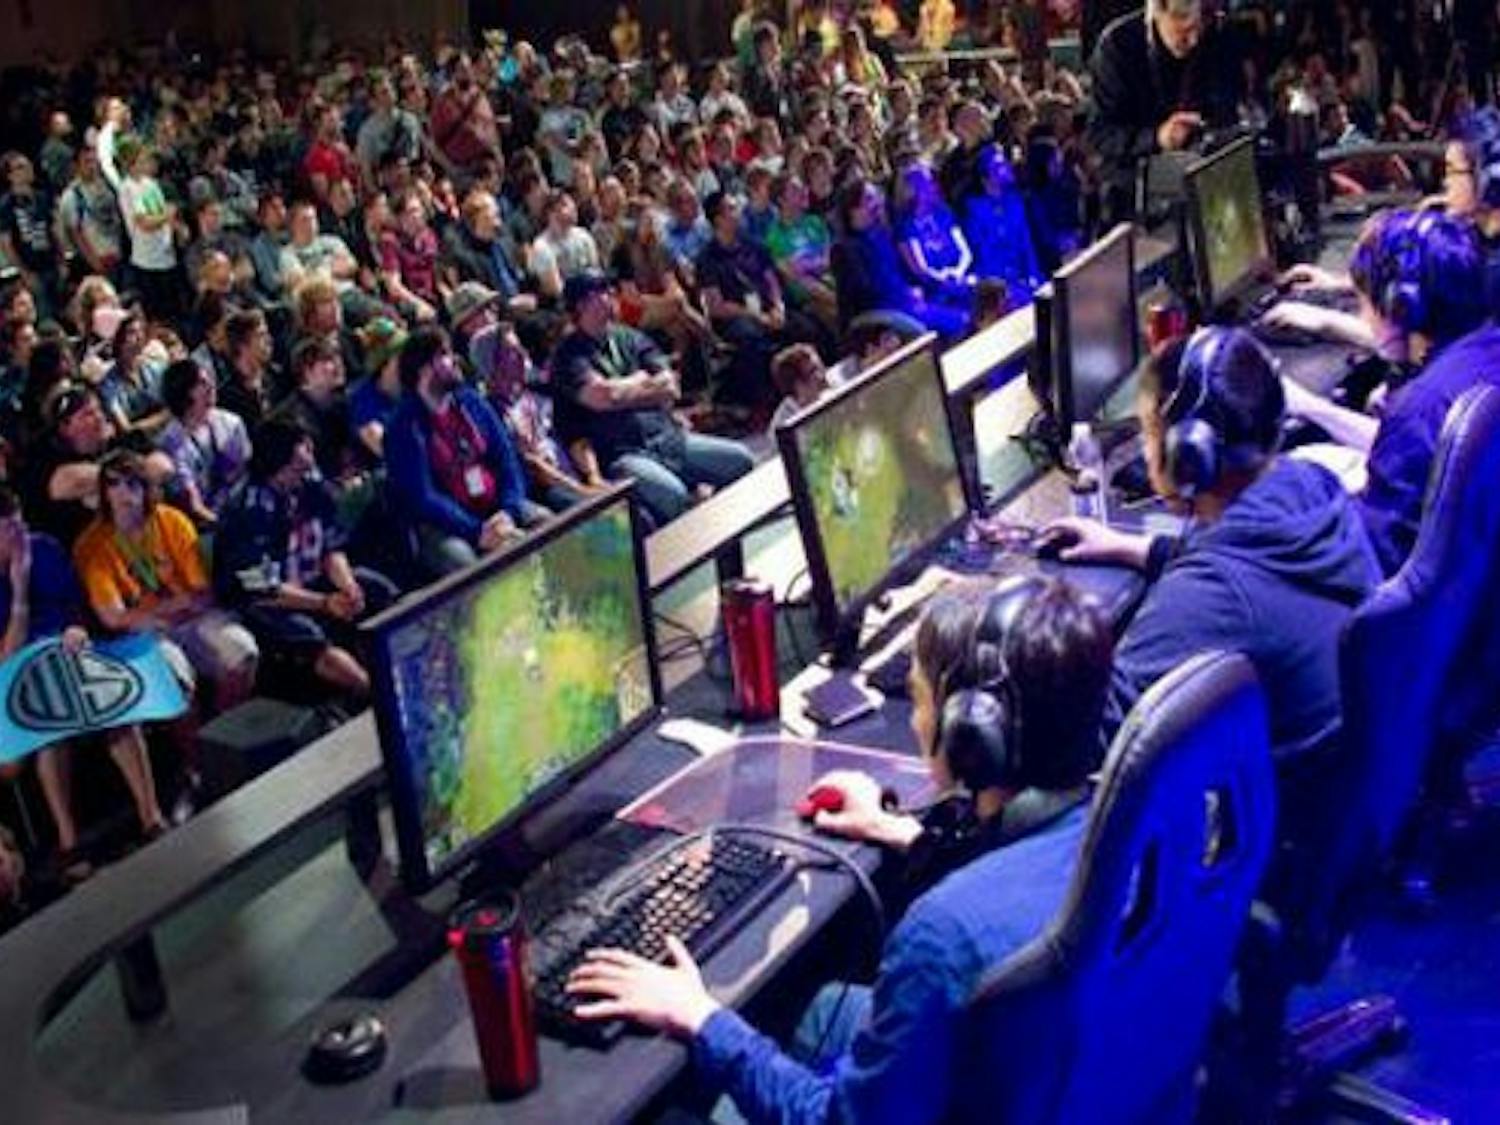 Clement's team faces tough competition in the League of Legends world championships.